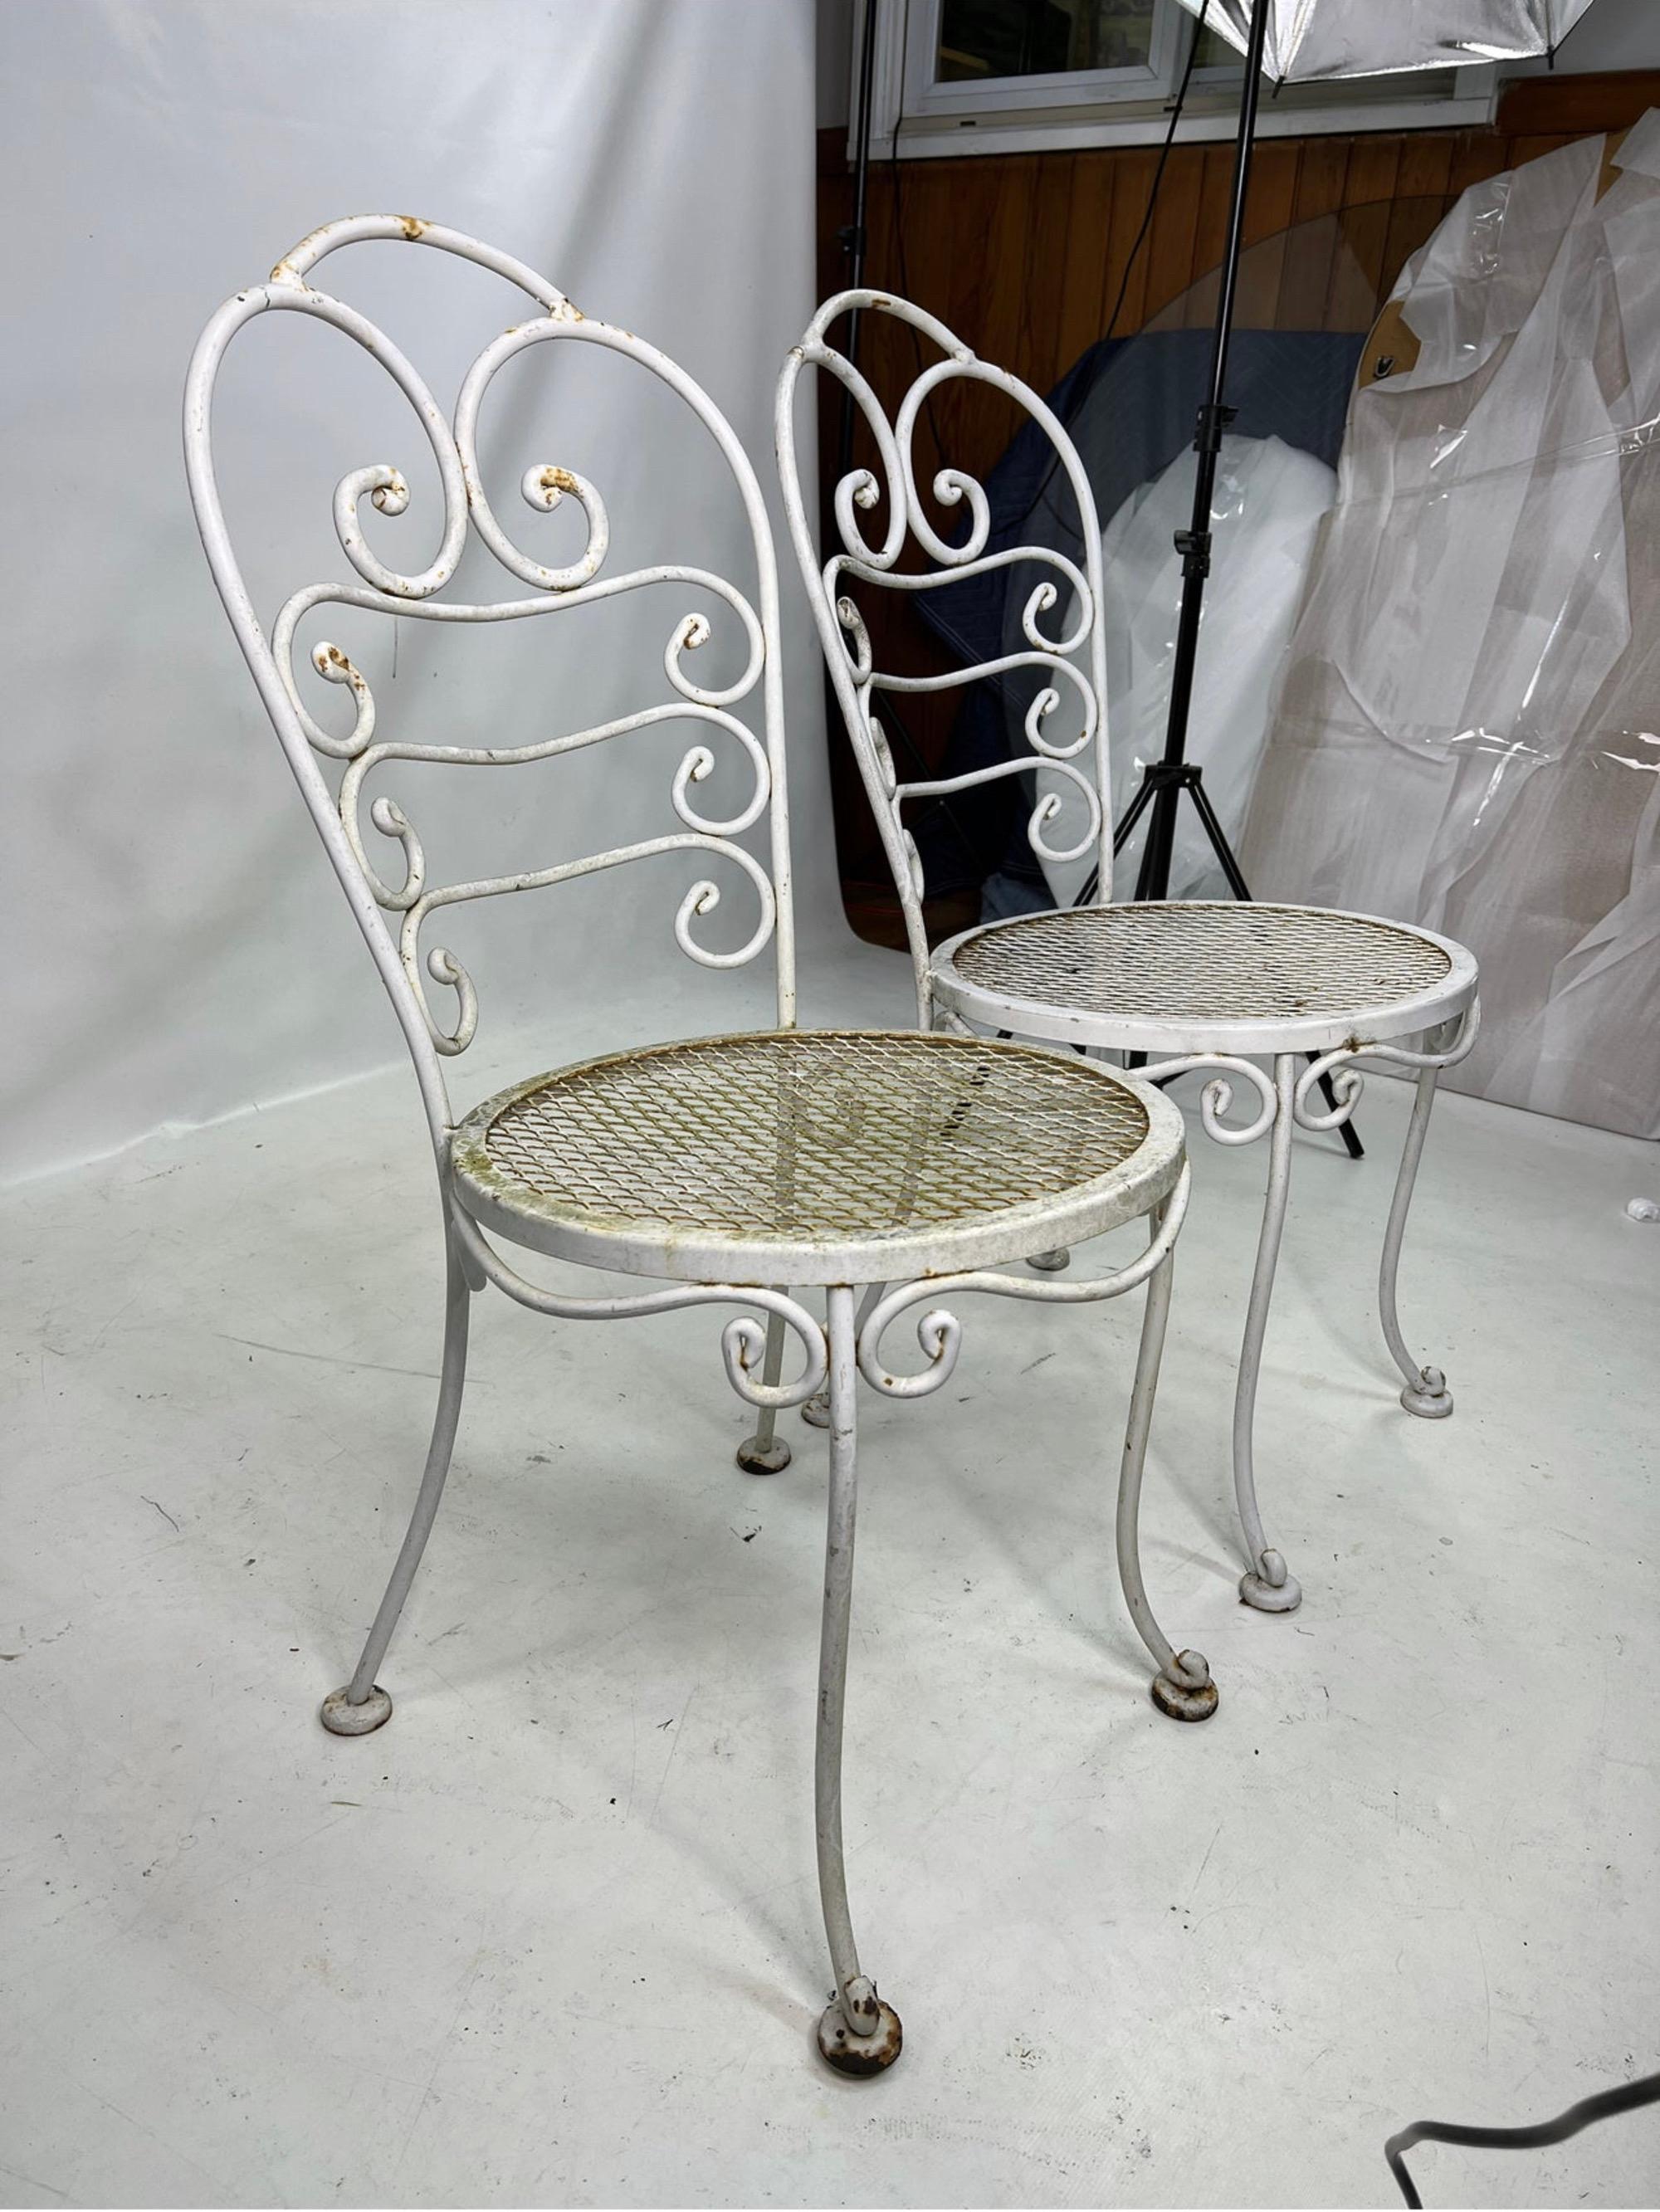 1960s Wrought iron cafe chairs - a pair.